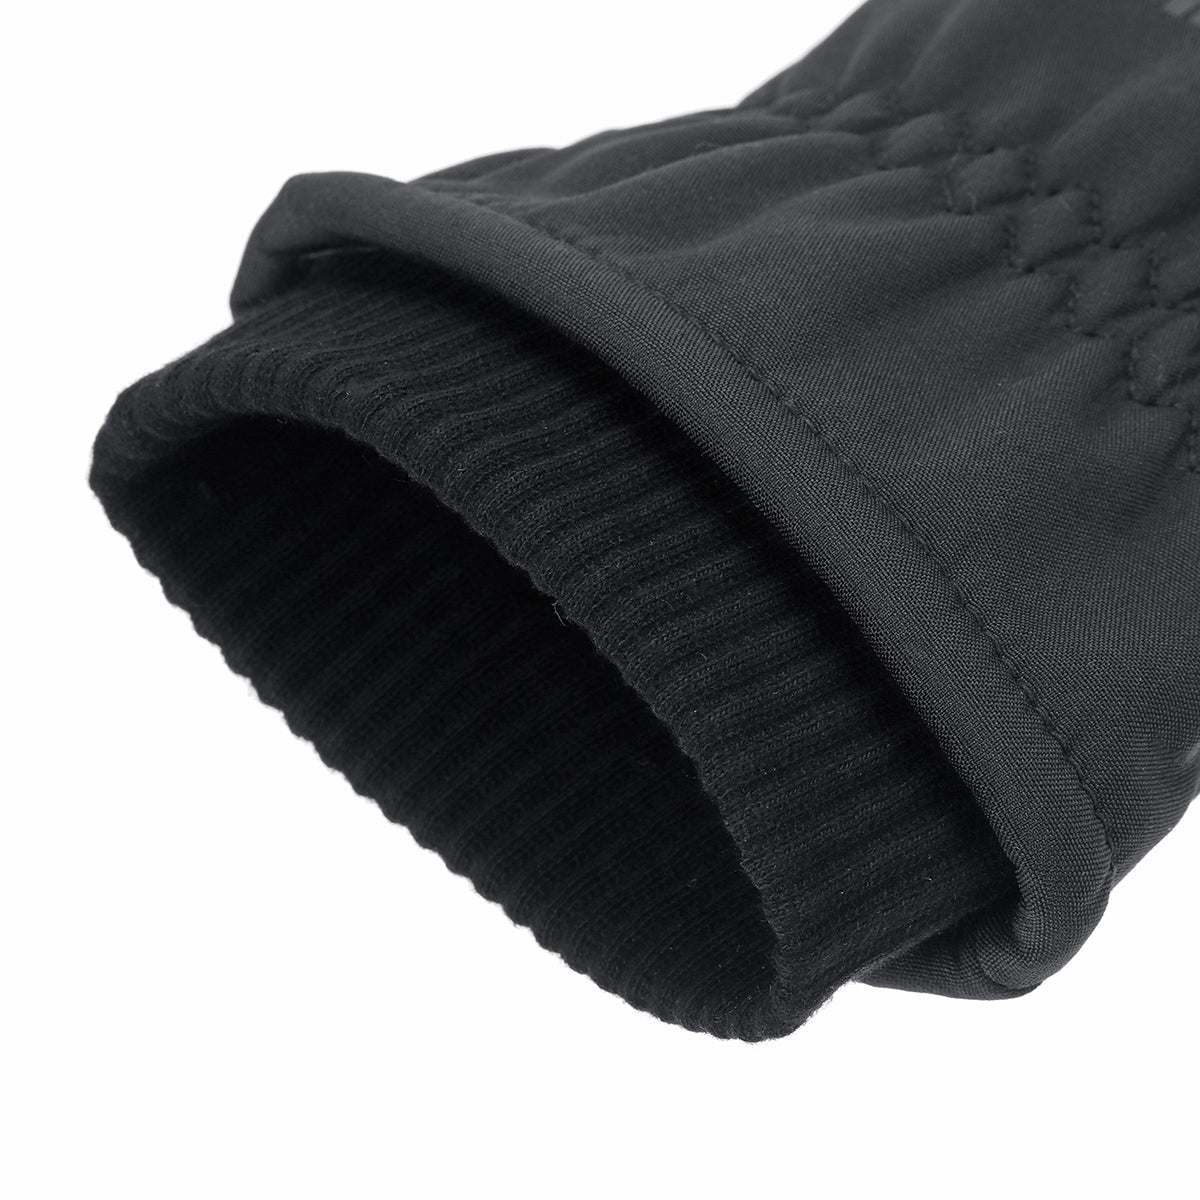 Black Winter Warm Touch Screen Thermal Gloves Motorcycle Ski Snow Snowboard Cycling Touchscreen Waterproof